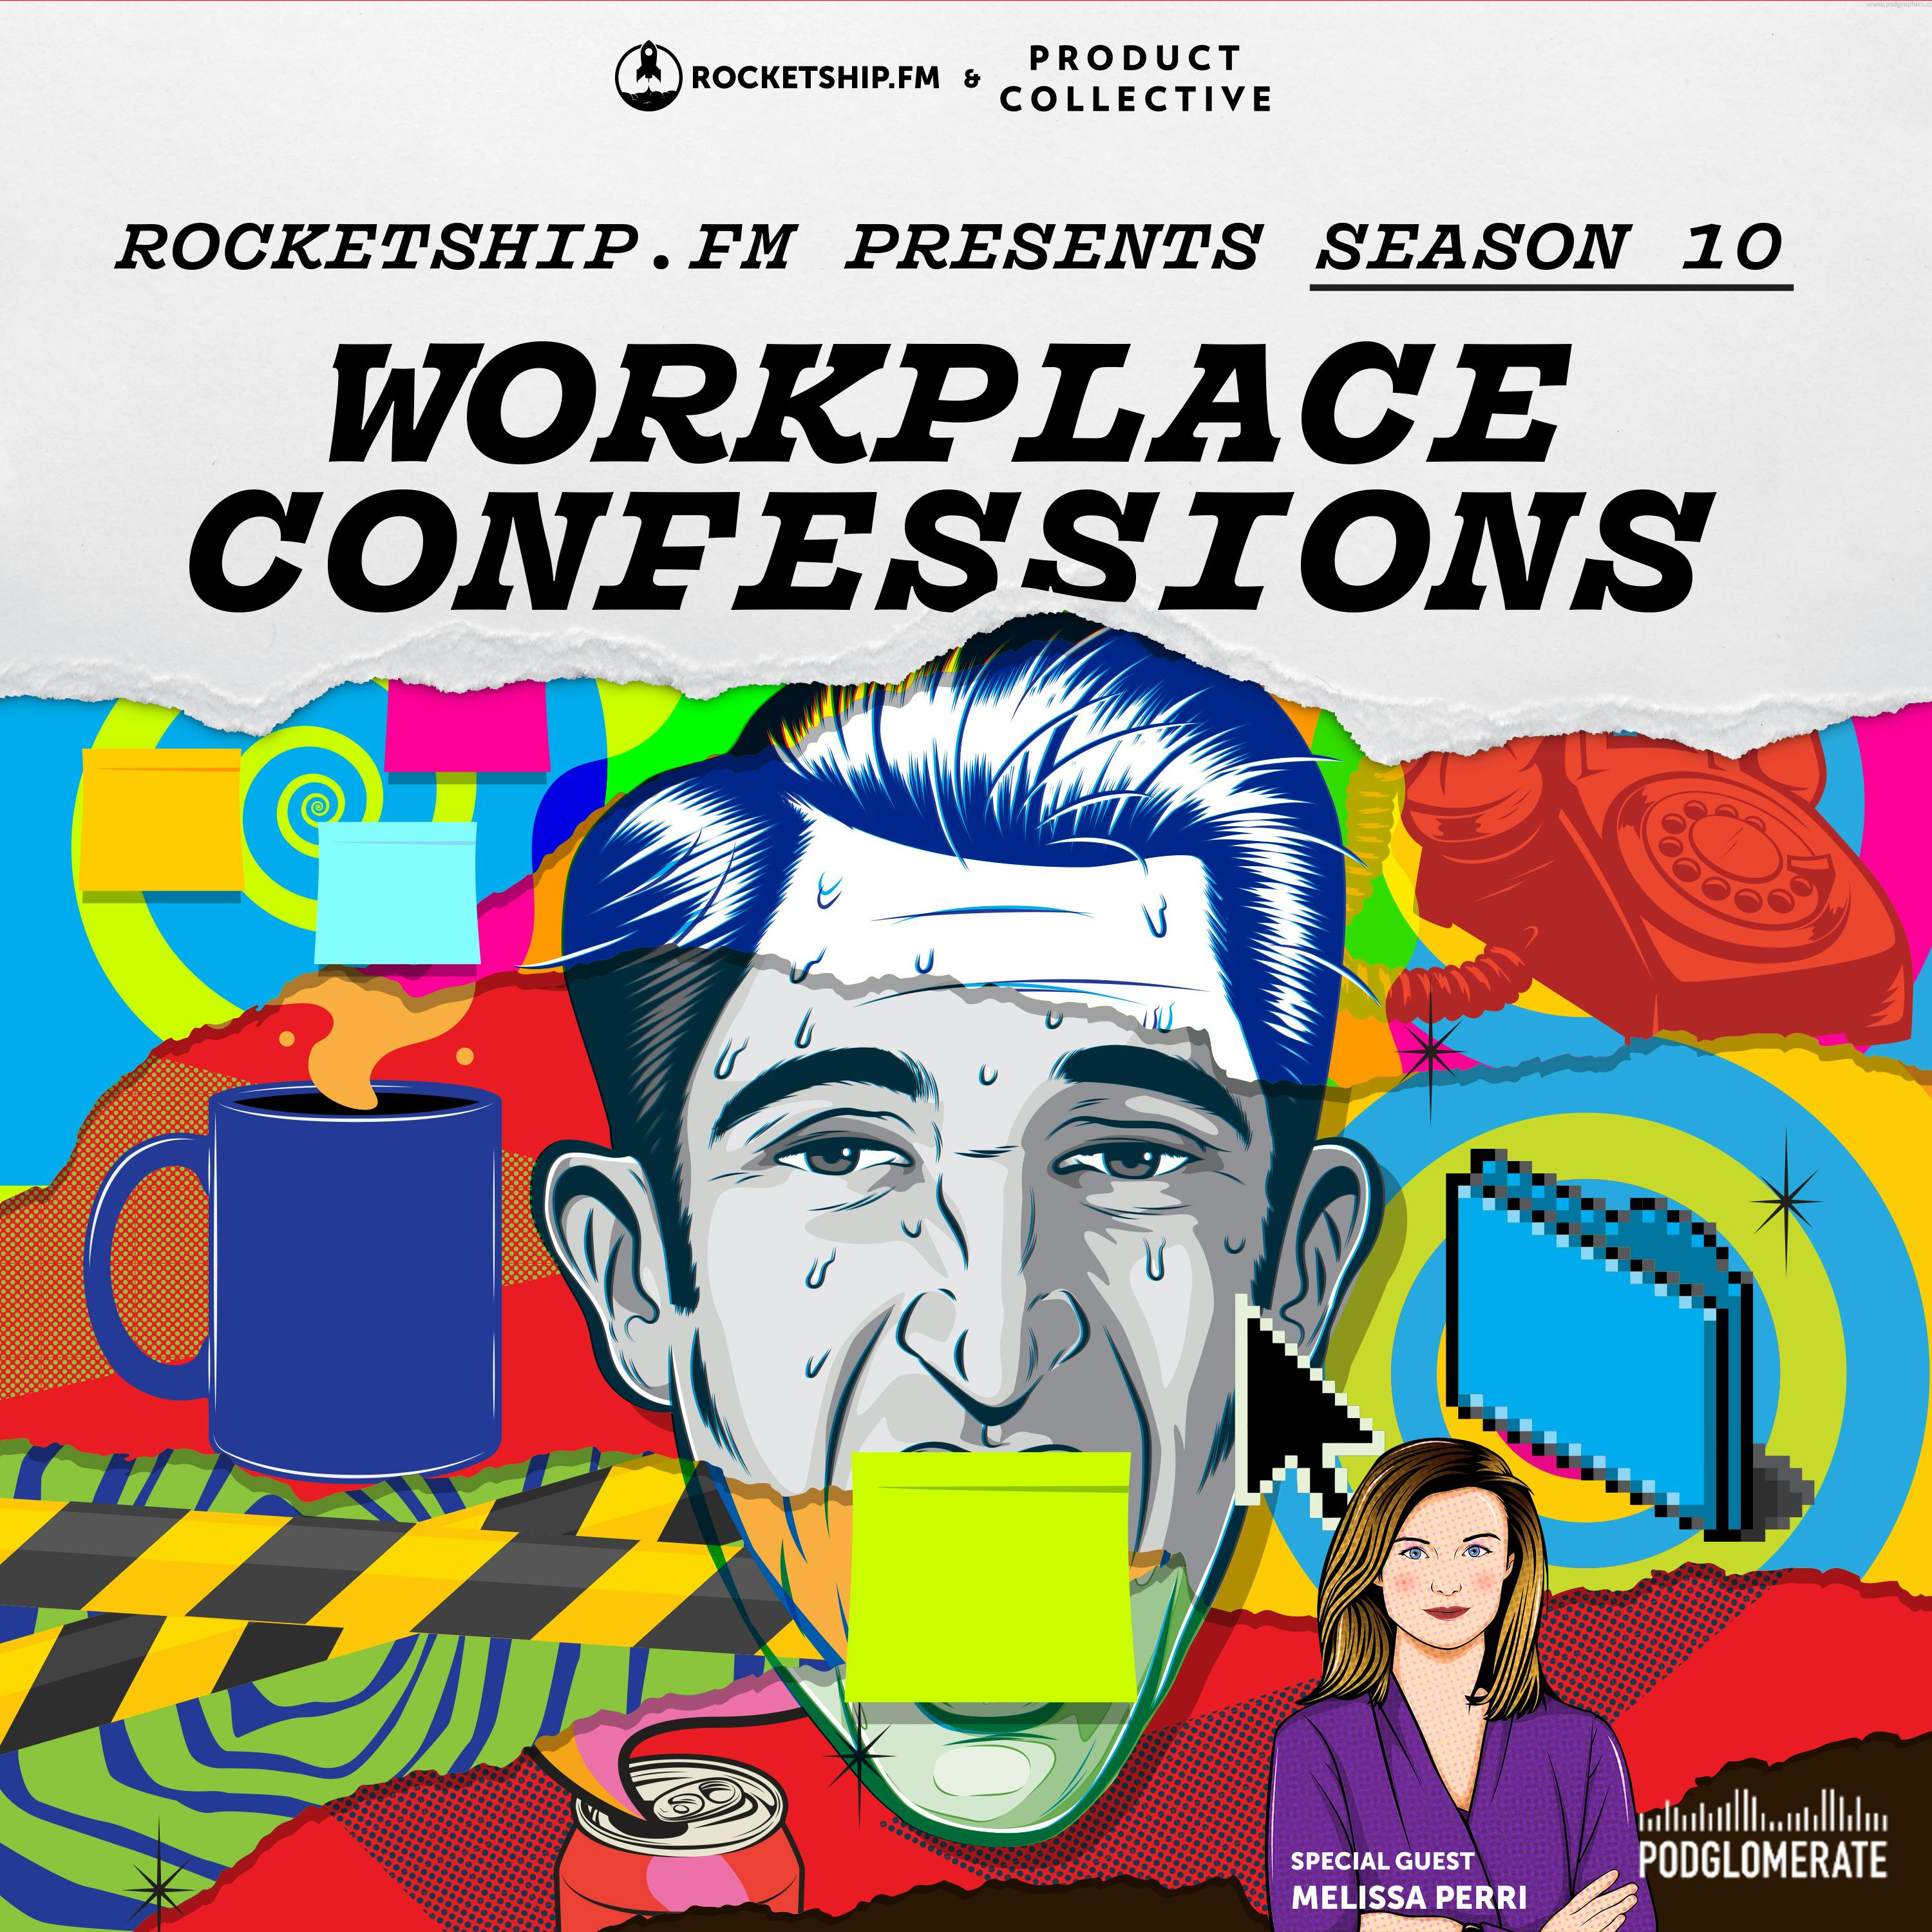 Workplace Confessions with Melissa Perri: "Communication Conundrum" & "More than Just Awkward"